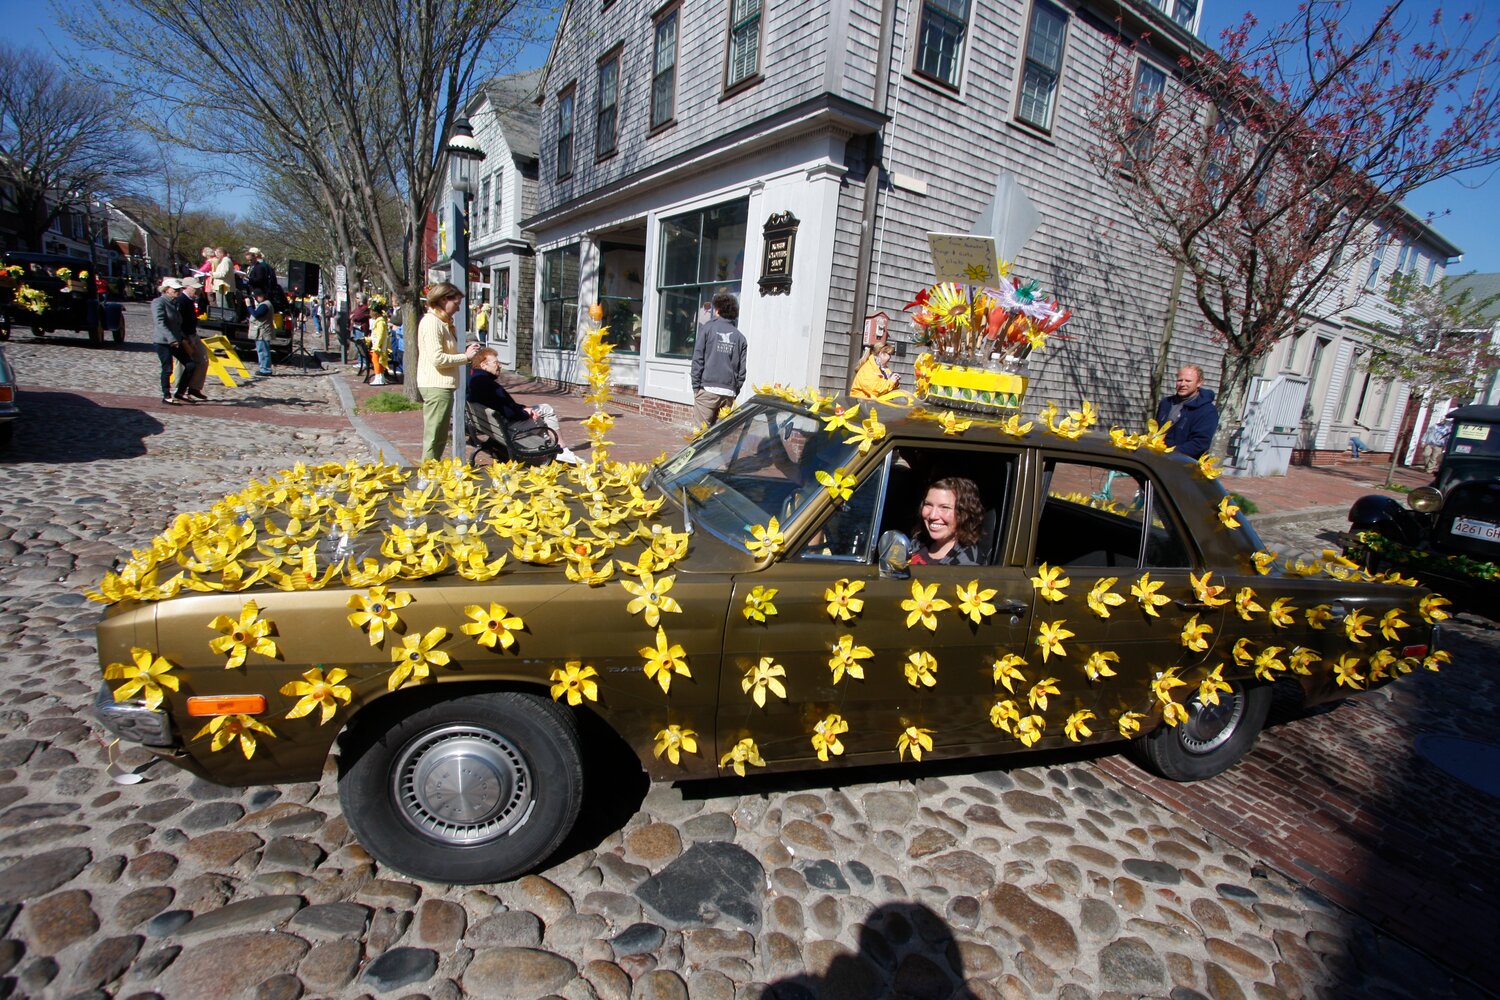 photo by Jim Powers--.Scene from the annual Daffodil Festival on Saturday, April 24, 2010..Car staging on Main Street.